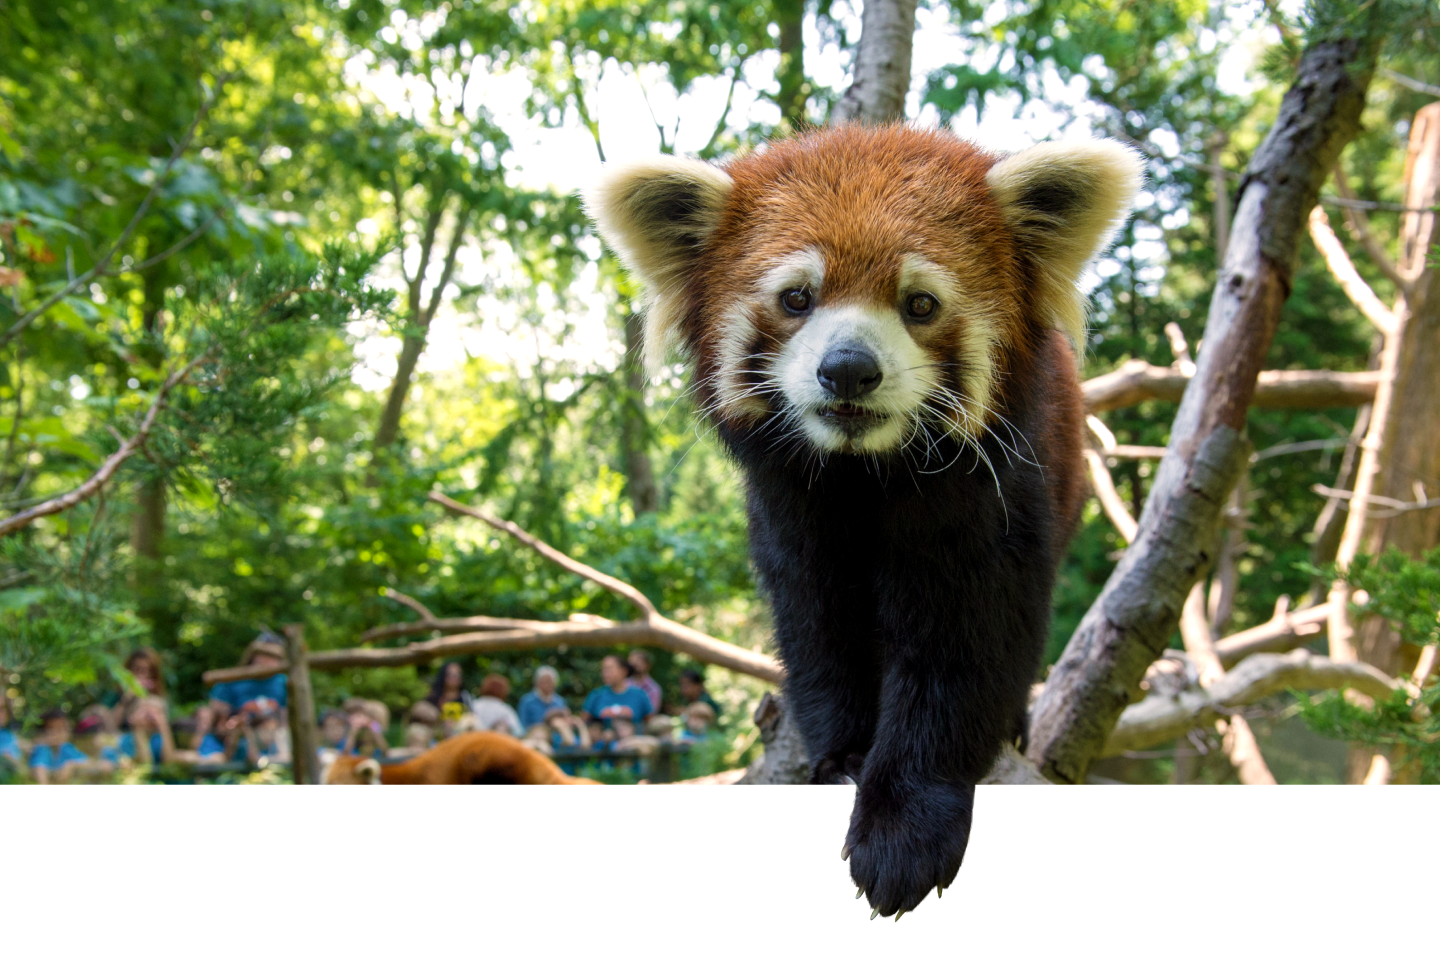 Red Panda walking out of the frame